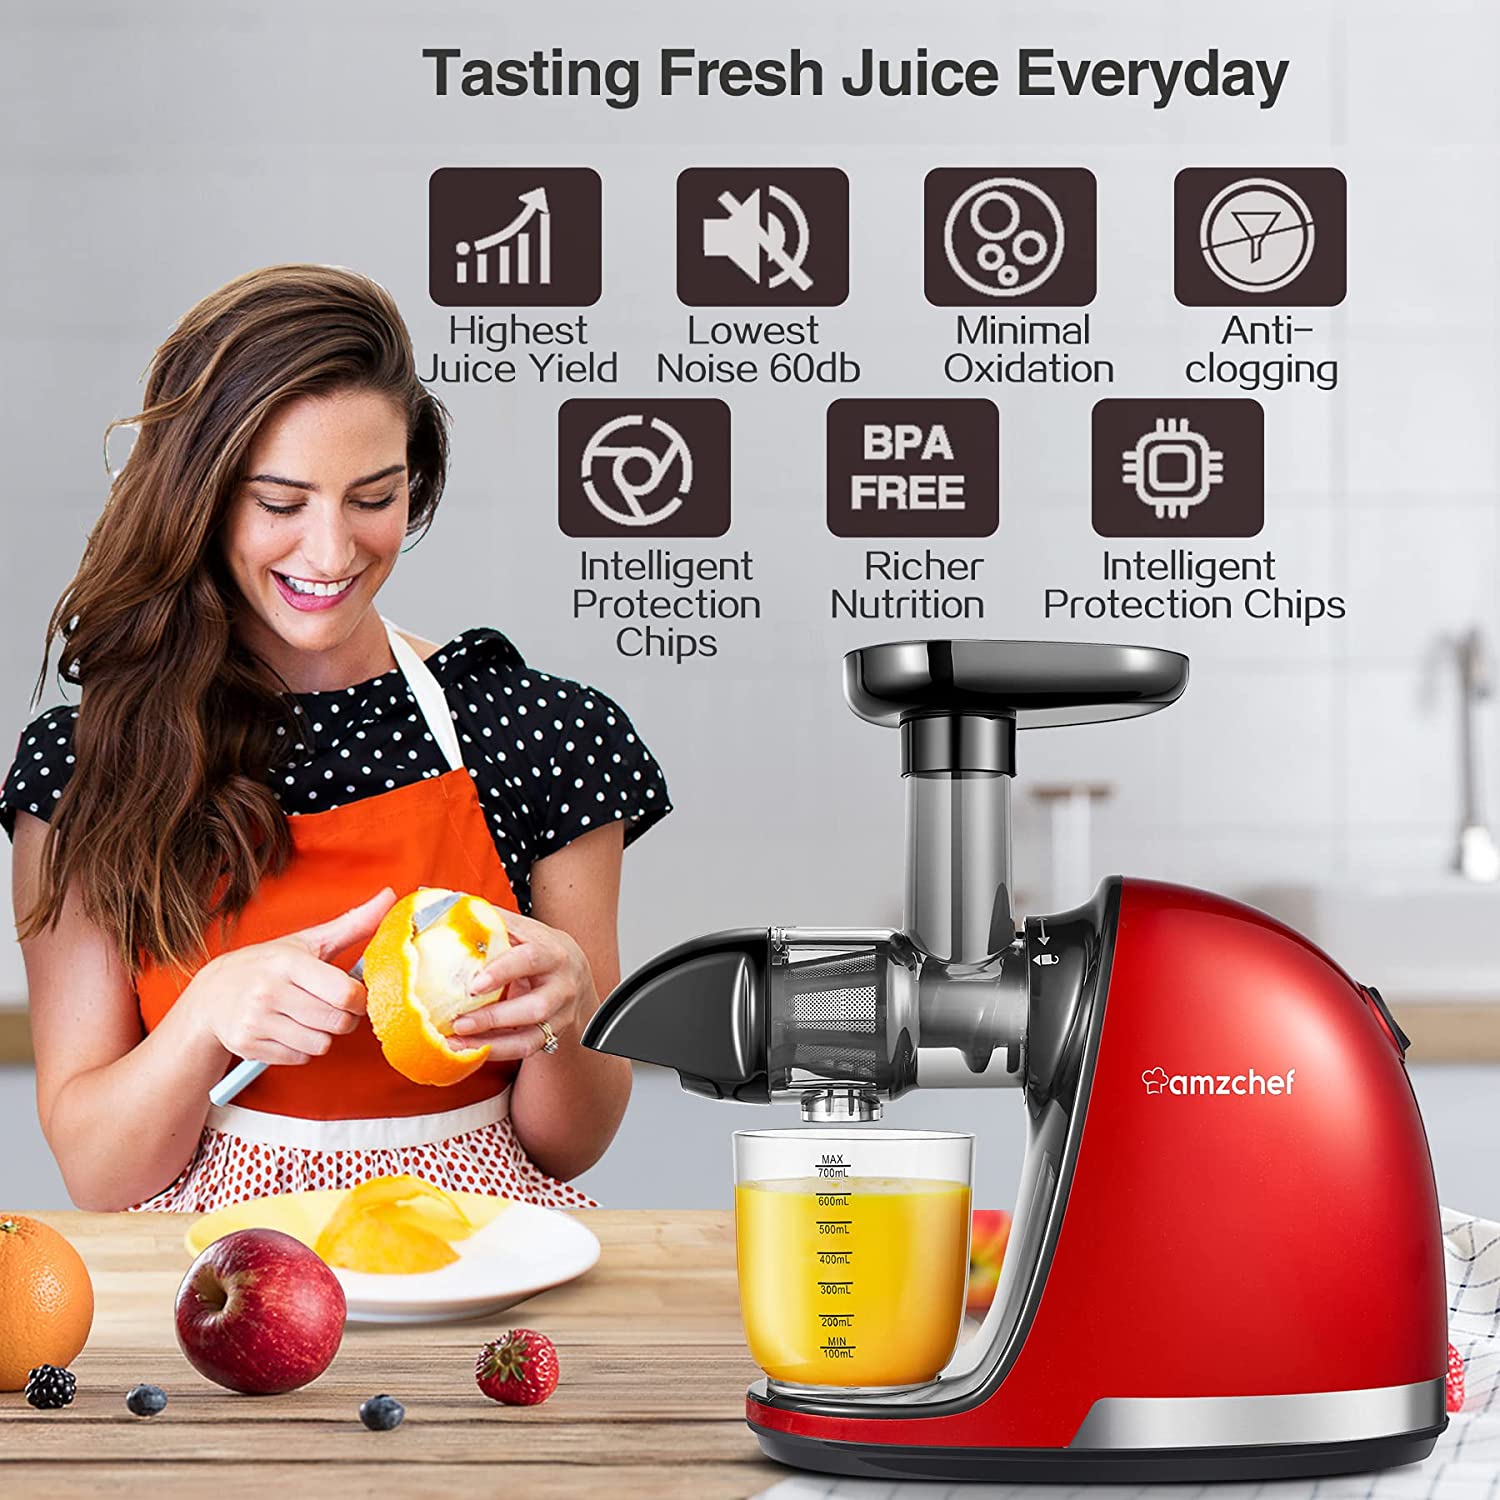 Slow Juicer Extractor, AMZCHEF Slow Masticating Juicer Machines with Quiet Motor, Juice Extractor with Reverse Function, Cold Press Juicer Easy to Clean with Brush for High Nutrient Fruit & Vegetable Juice